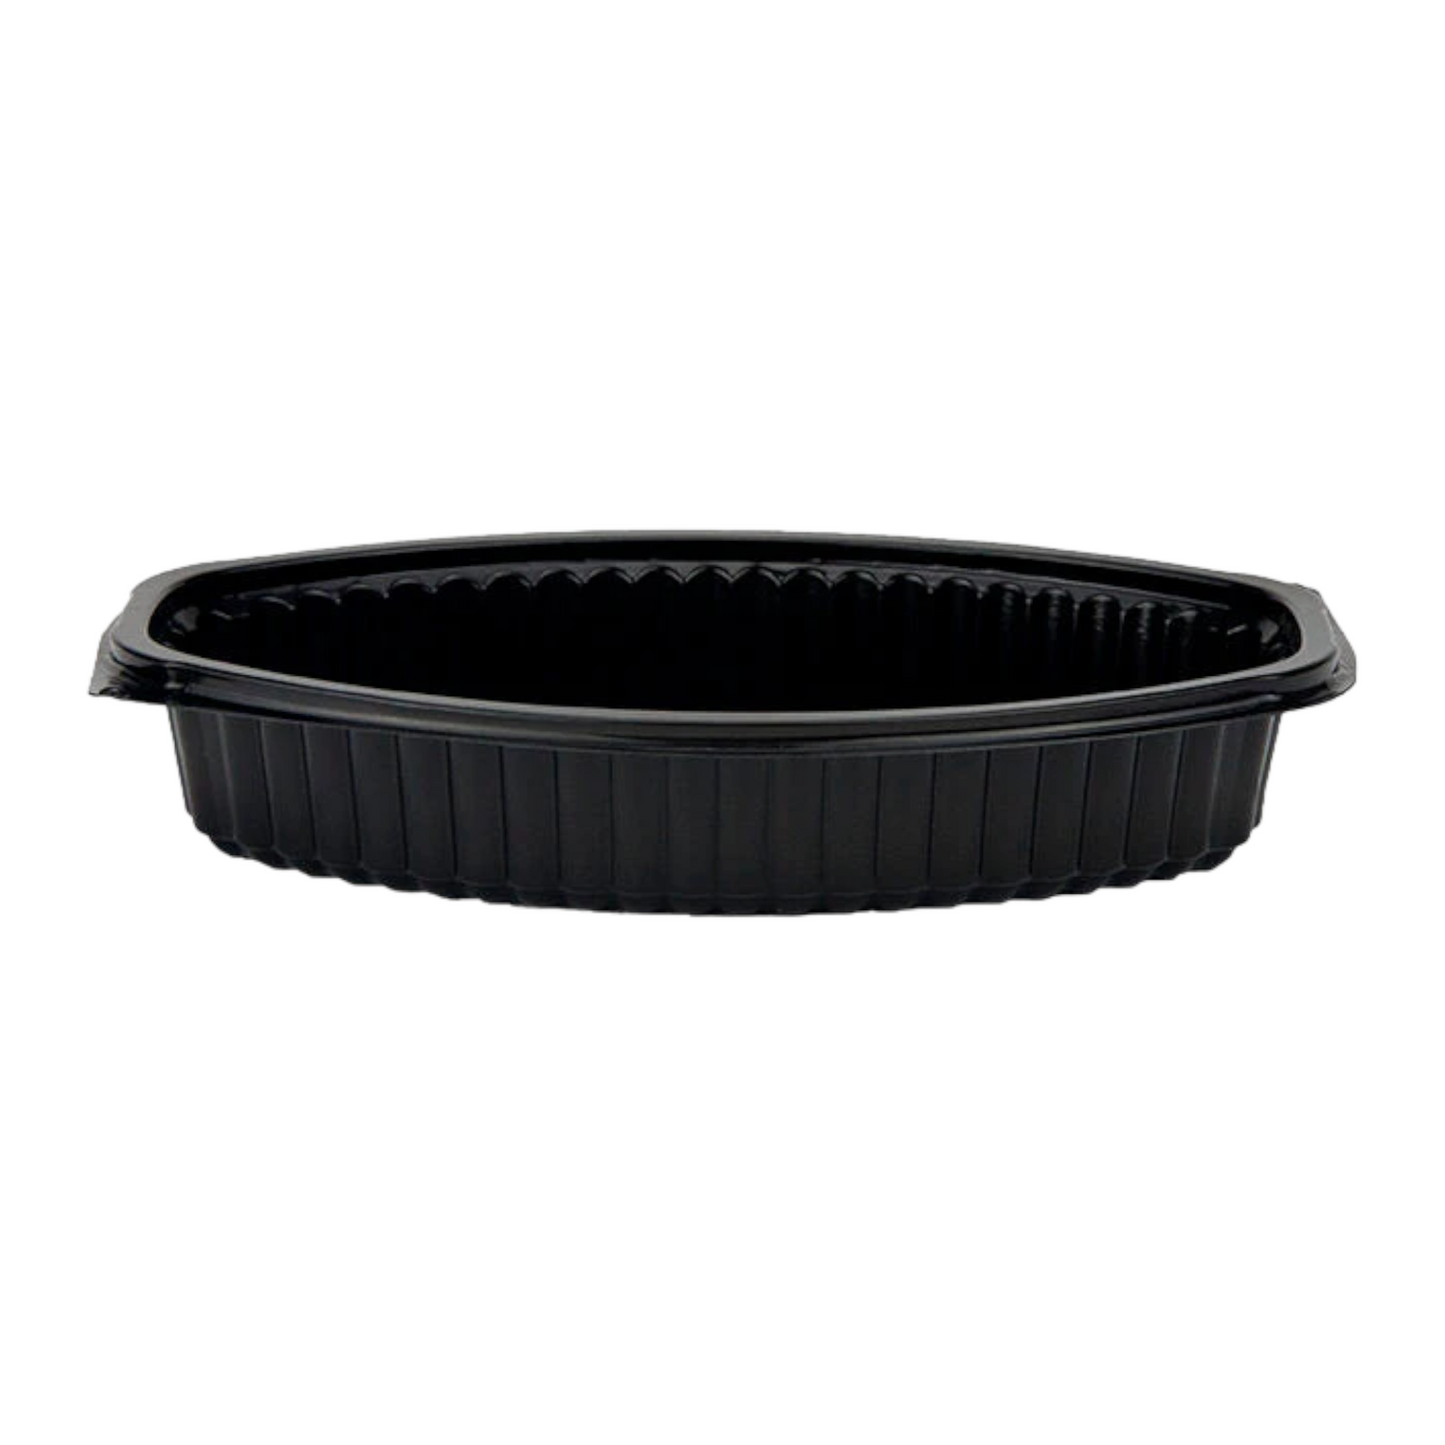 Mani [M-7100 PP] 16oz Oval Microwave Container (Base)